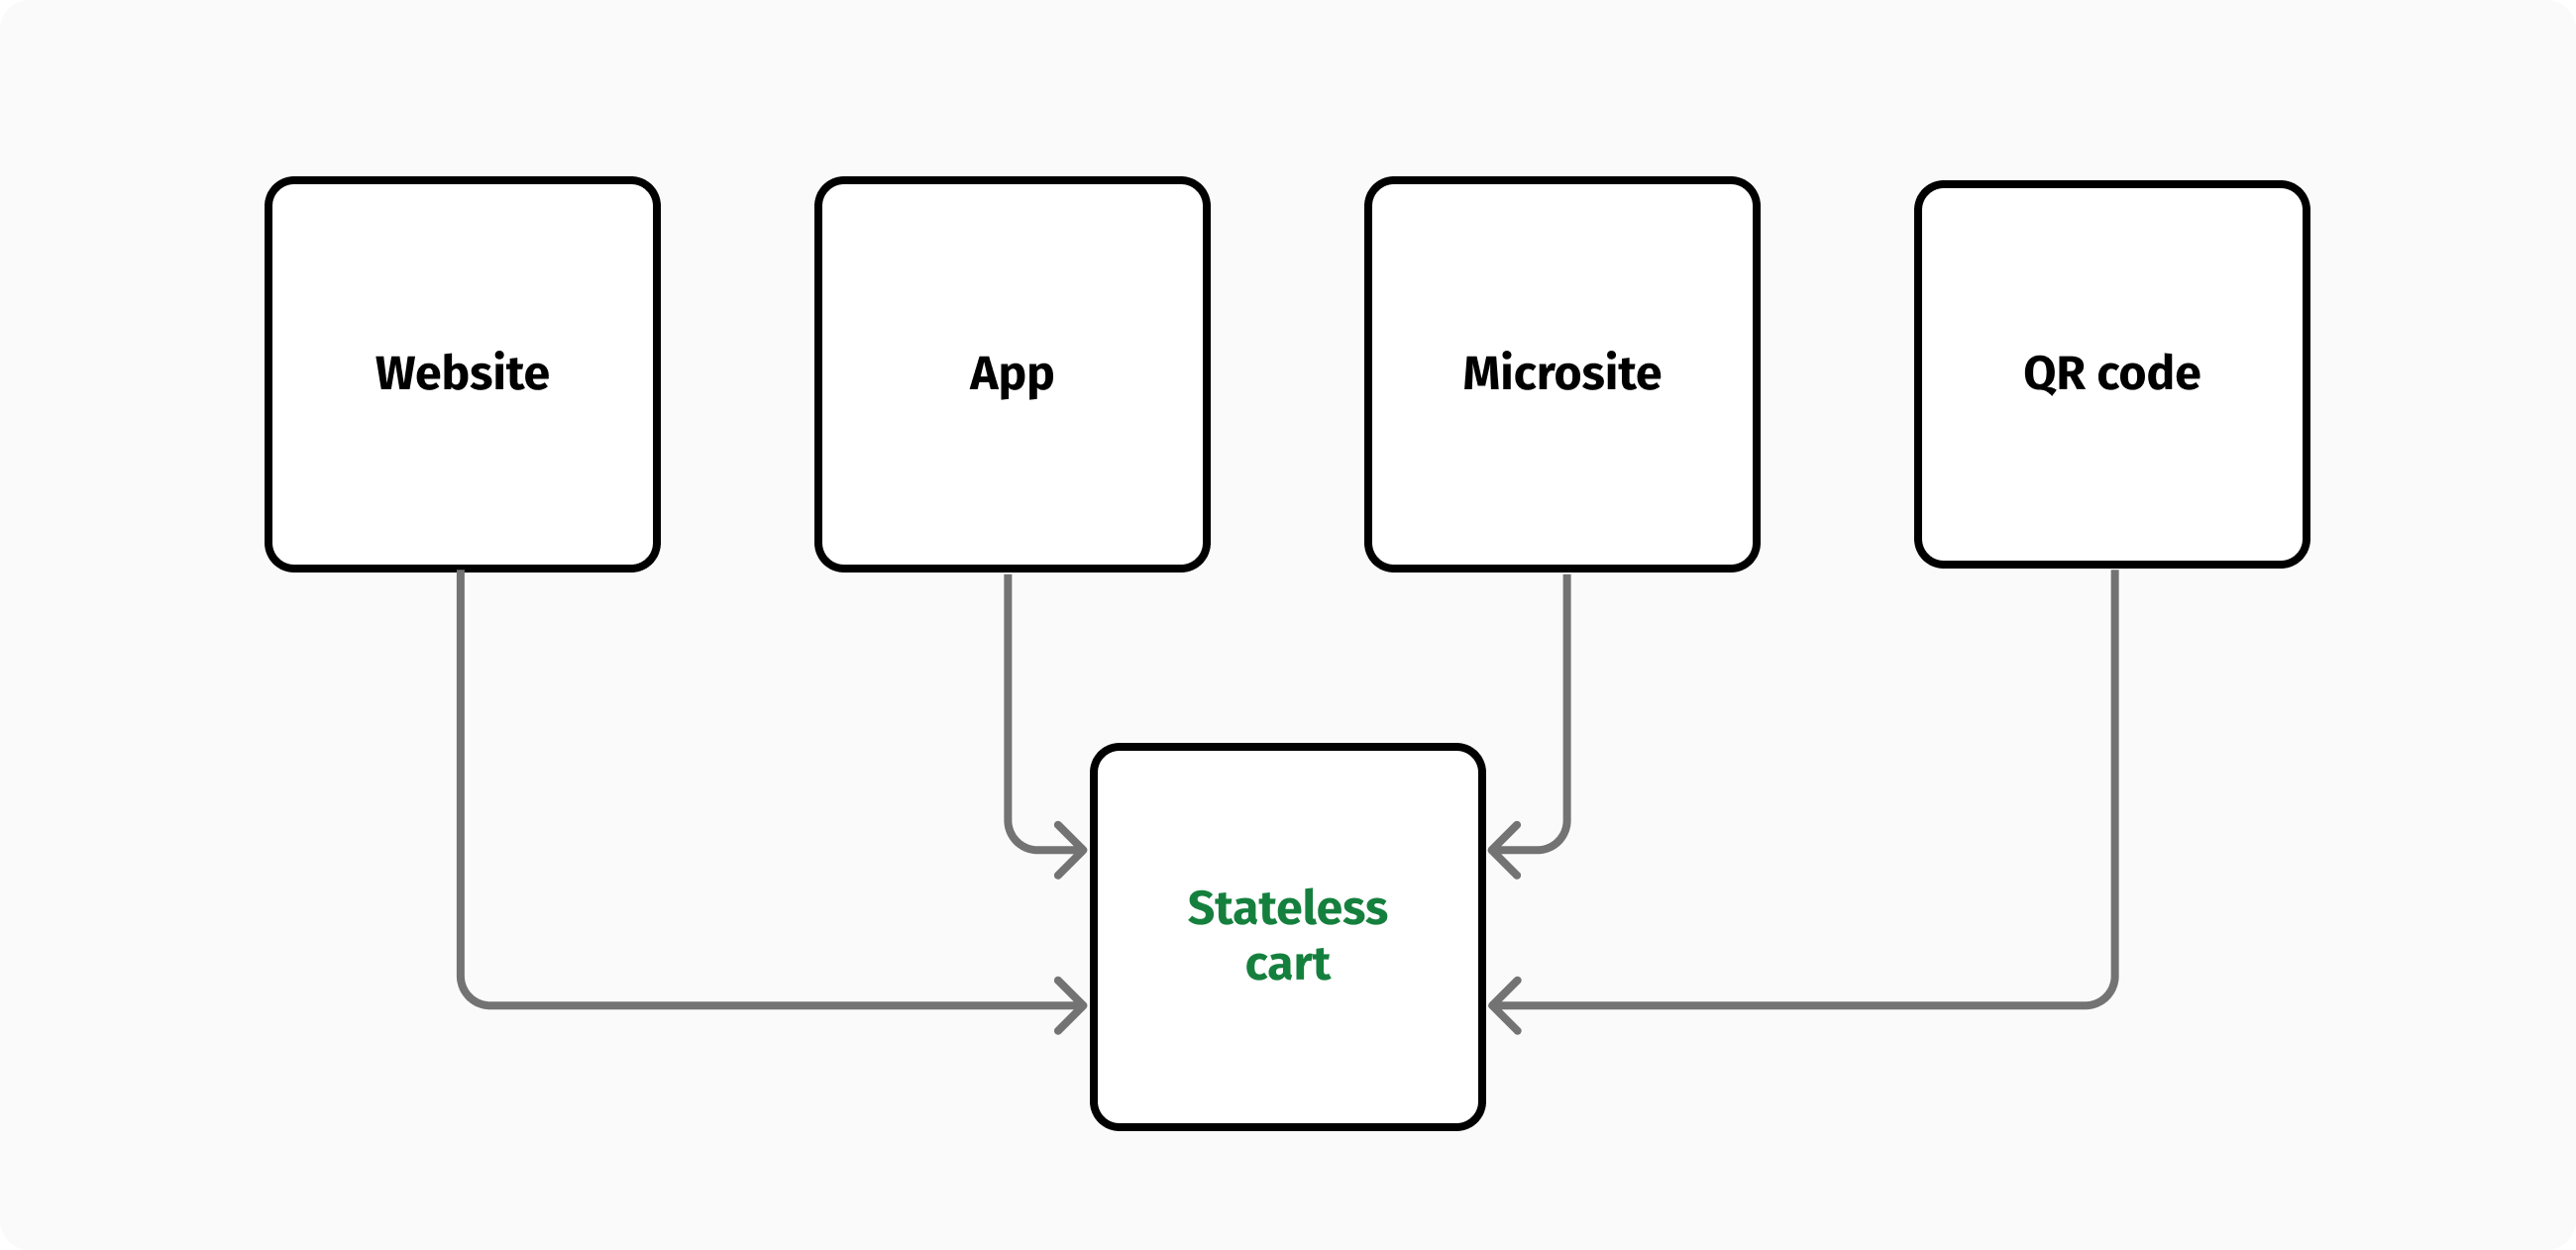 A stateless and omnichannel shopping cart.